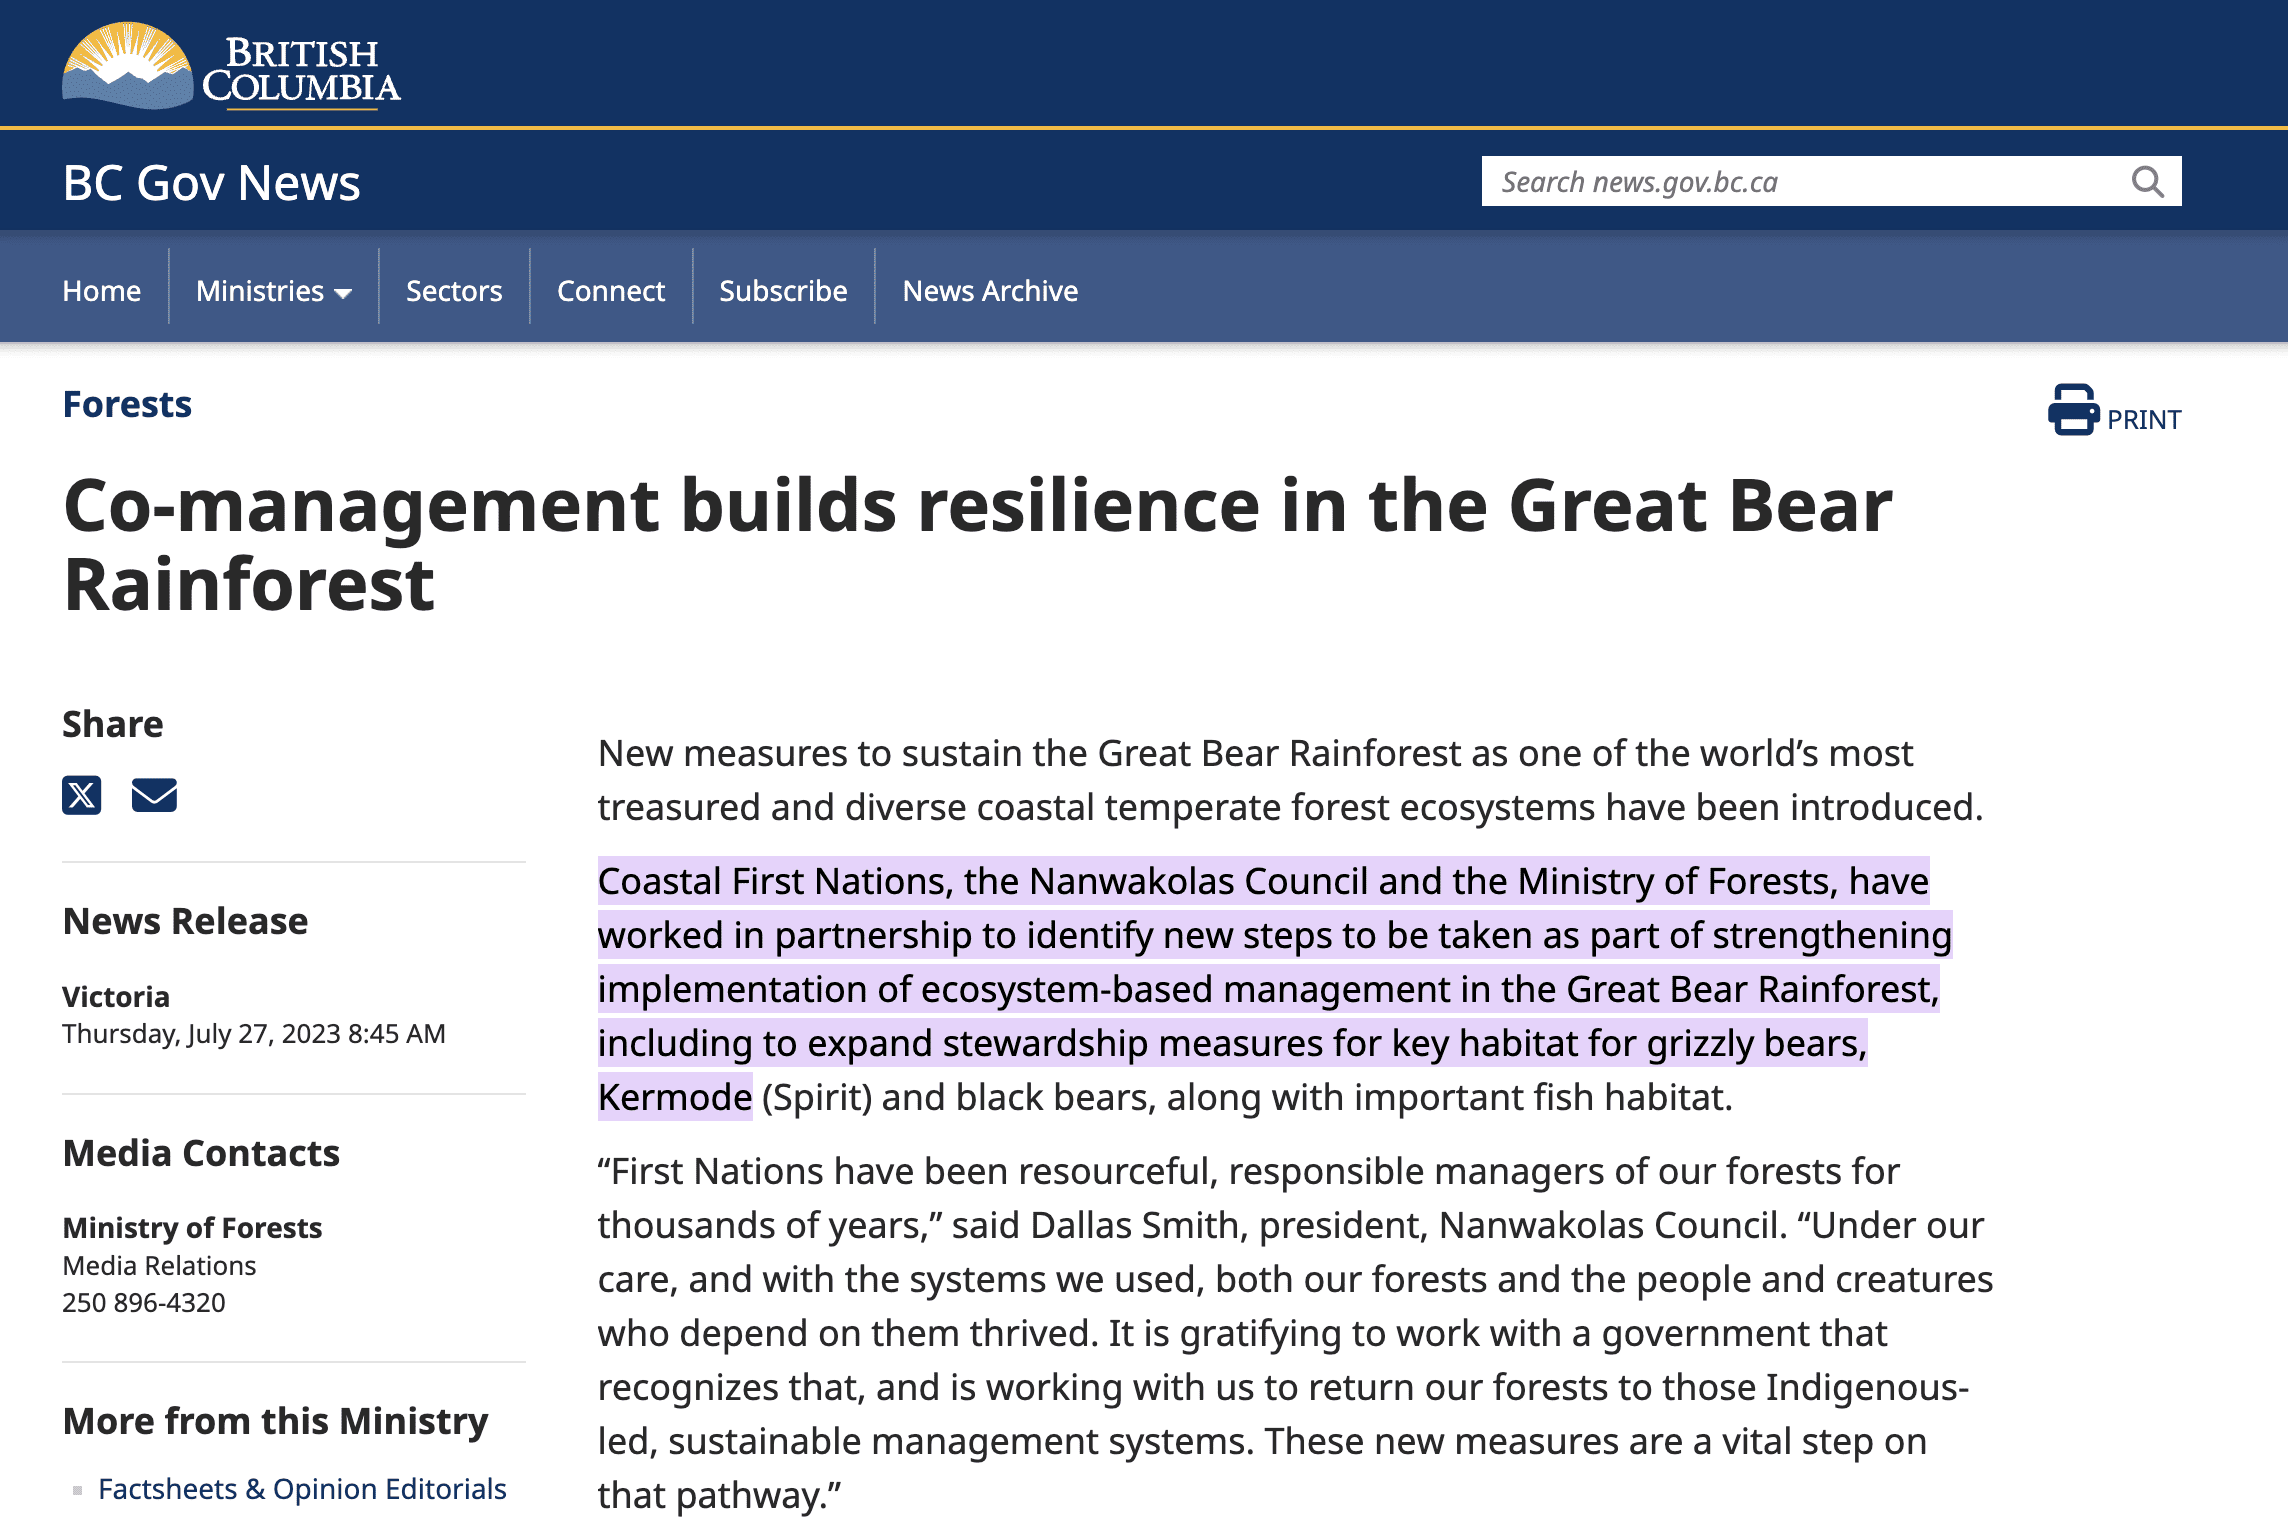 Co-management builds resilience in the Great Bear Rainforest press release screenshot